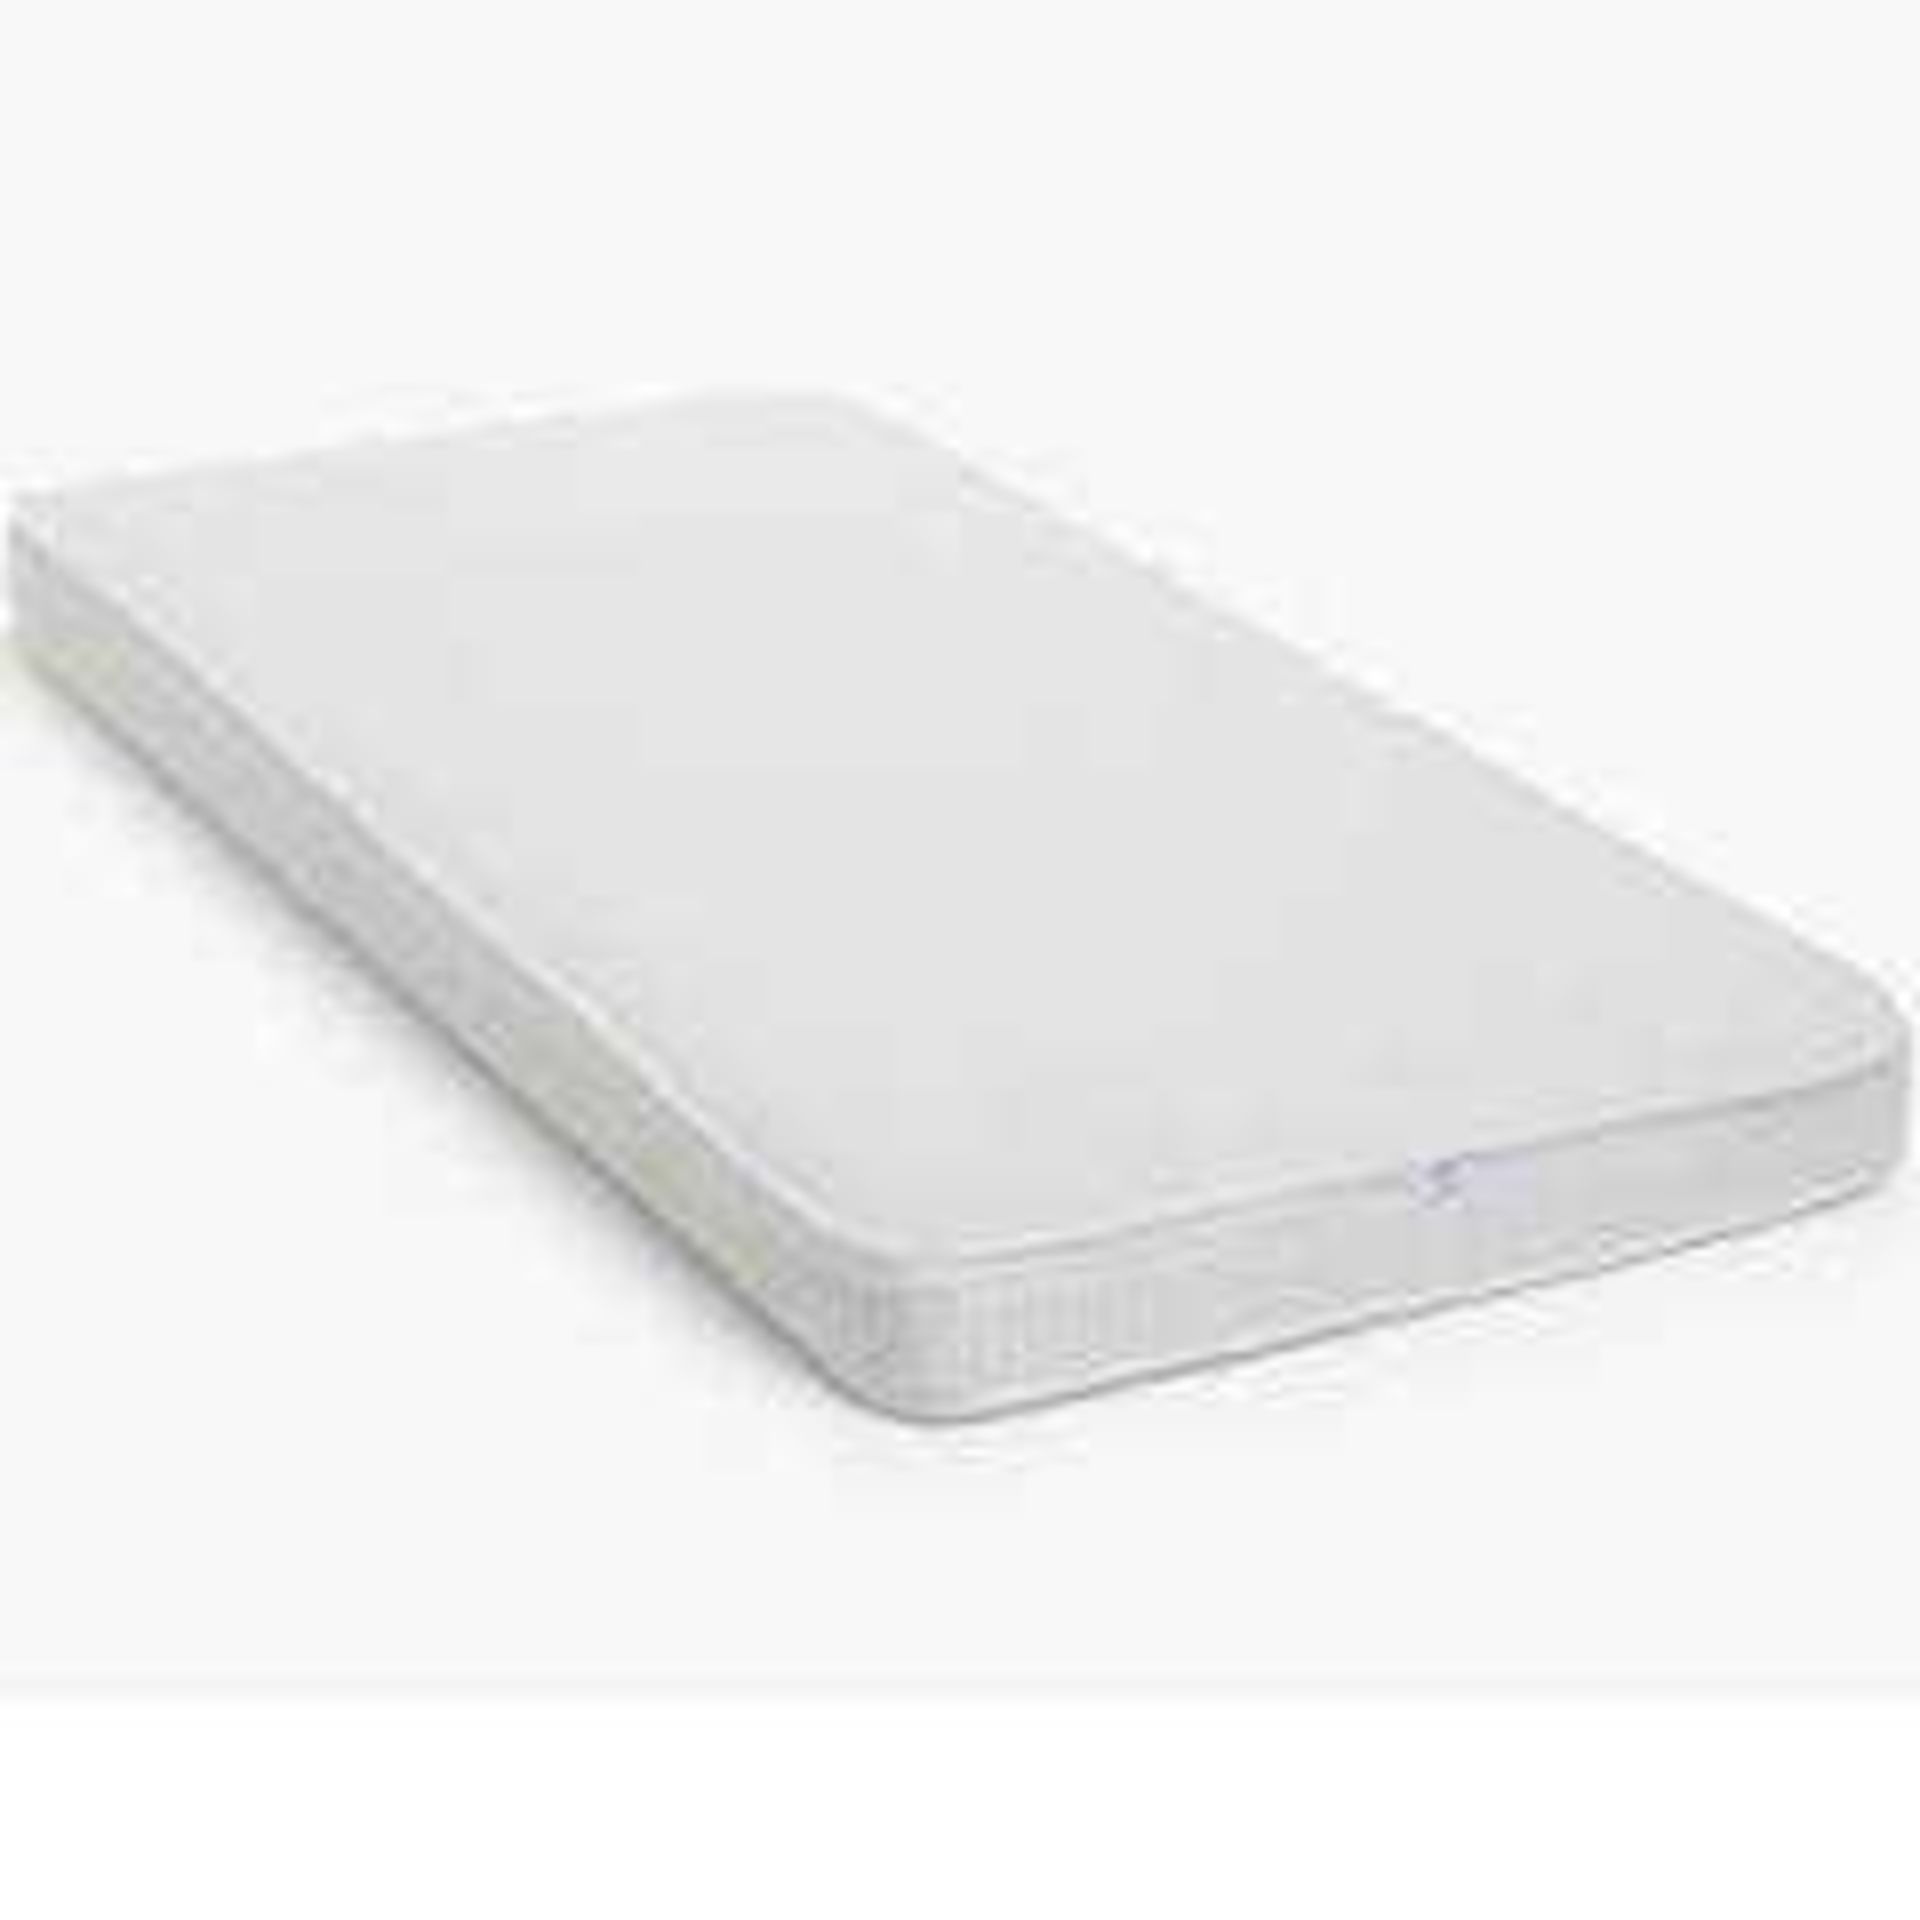 RRP £120 70X140Cm Premium Pocketed Cot Bed Mattress 321731 (Appraisals Are Available On Request) (